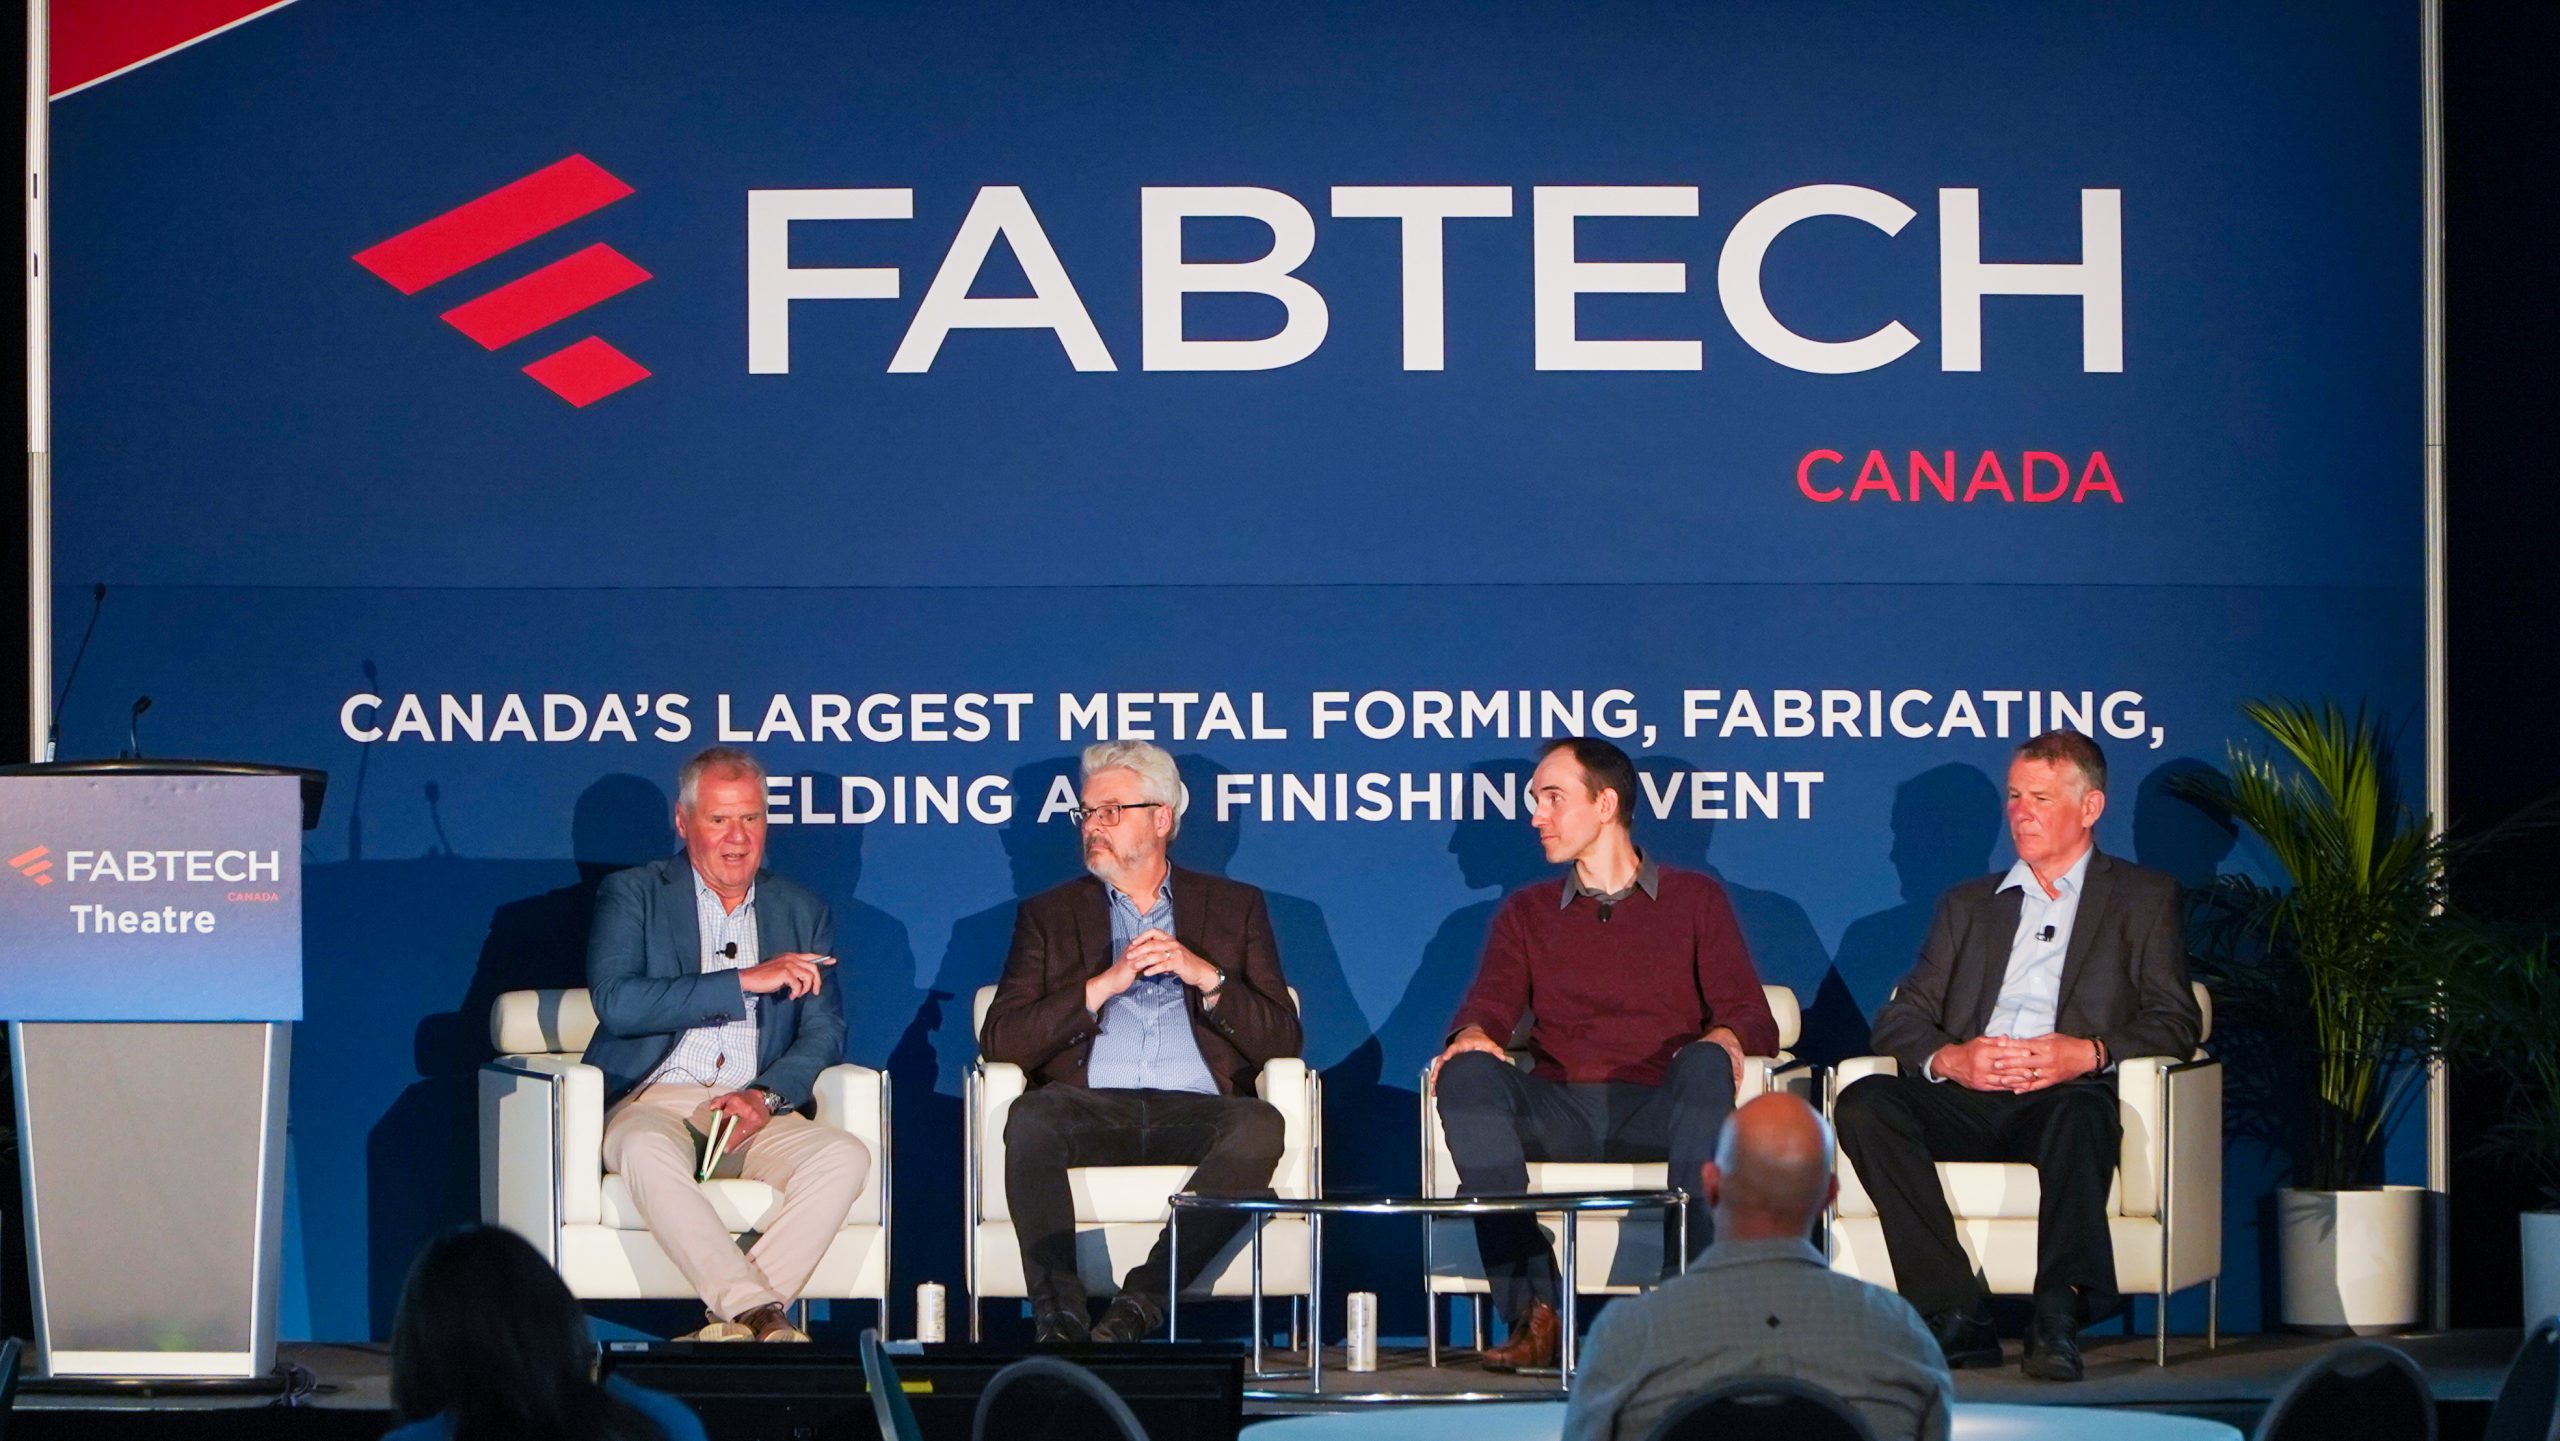 The featured image from ‘What We’ve always Done’ in Manufacturing Won’t Work Going Forward, Canada’s Industry Heavyweights to Share at FABTECH Canada Panel